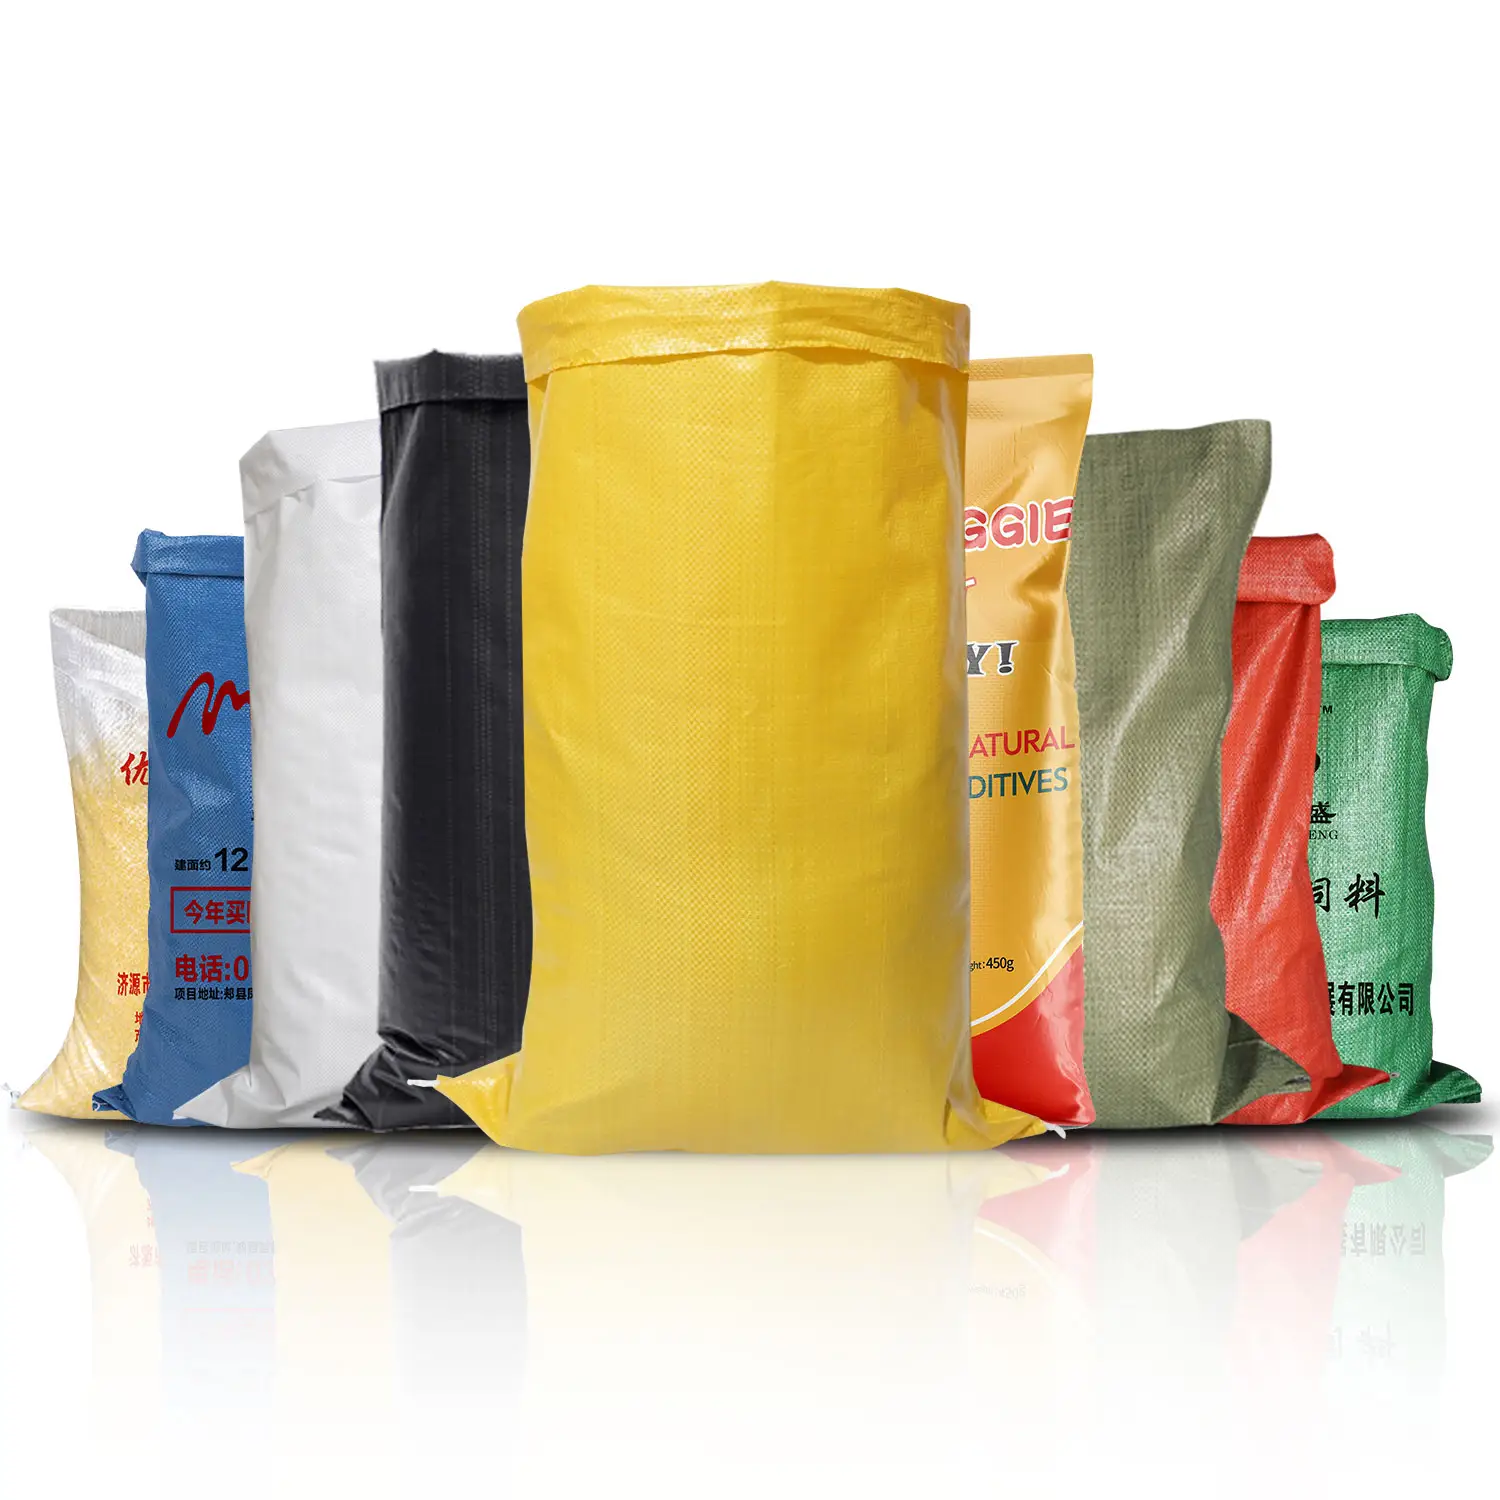 China White Yellow PP Woven-Bag Sack for Rice Flour Food Wheat for Agriculture Industrial Use plastik 25kg 50kg pp woven bag